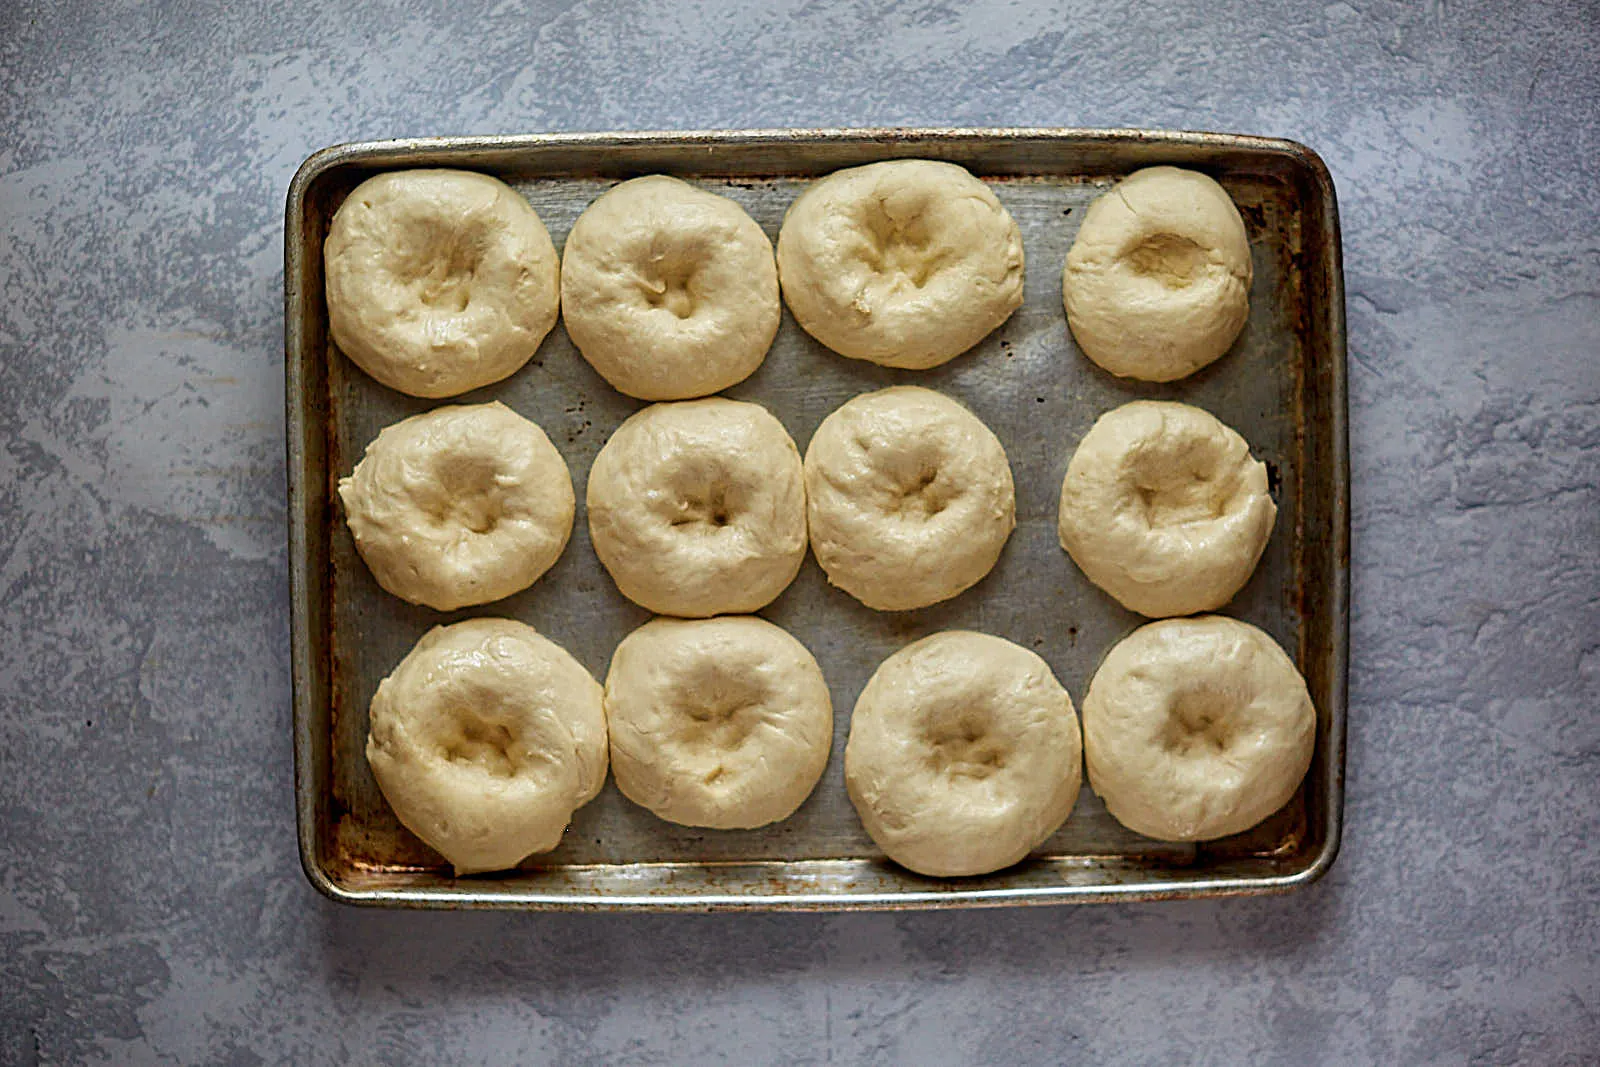 Top down view of rising kolache dough rolls with dented top.